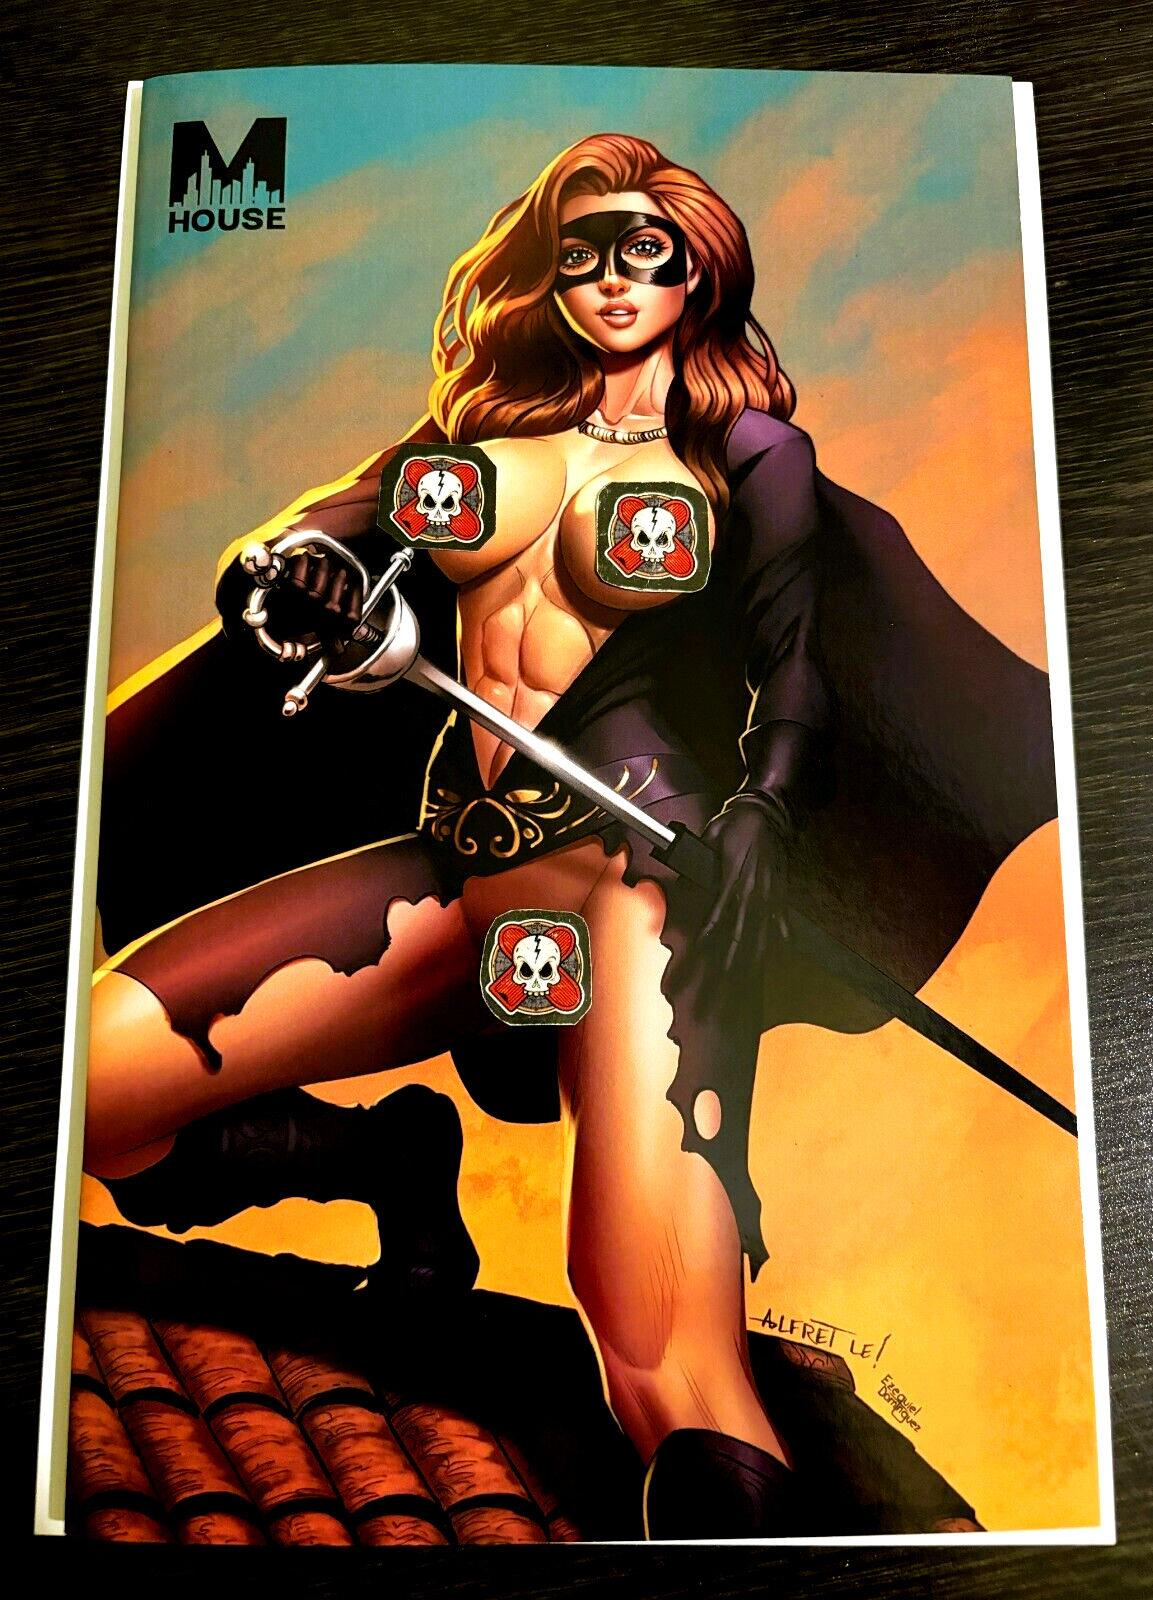 M HOUSE #1 WOMAN OF WAR ZORRO ALFRET LE EXCLUSIVE NUDE TRADES COVER LTD 50 NM+